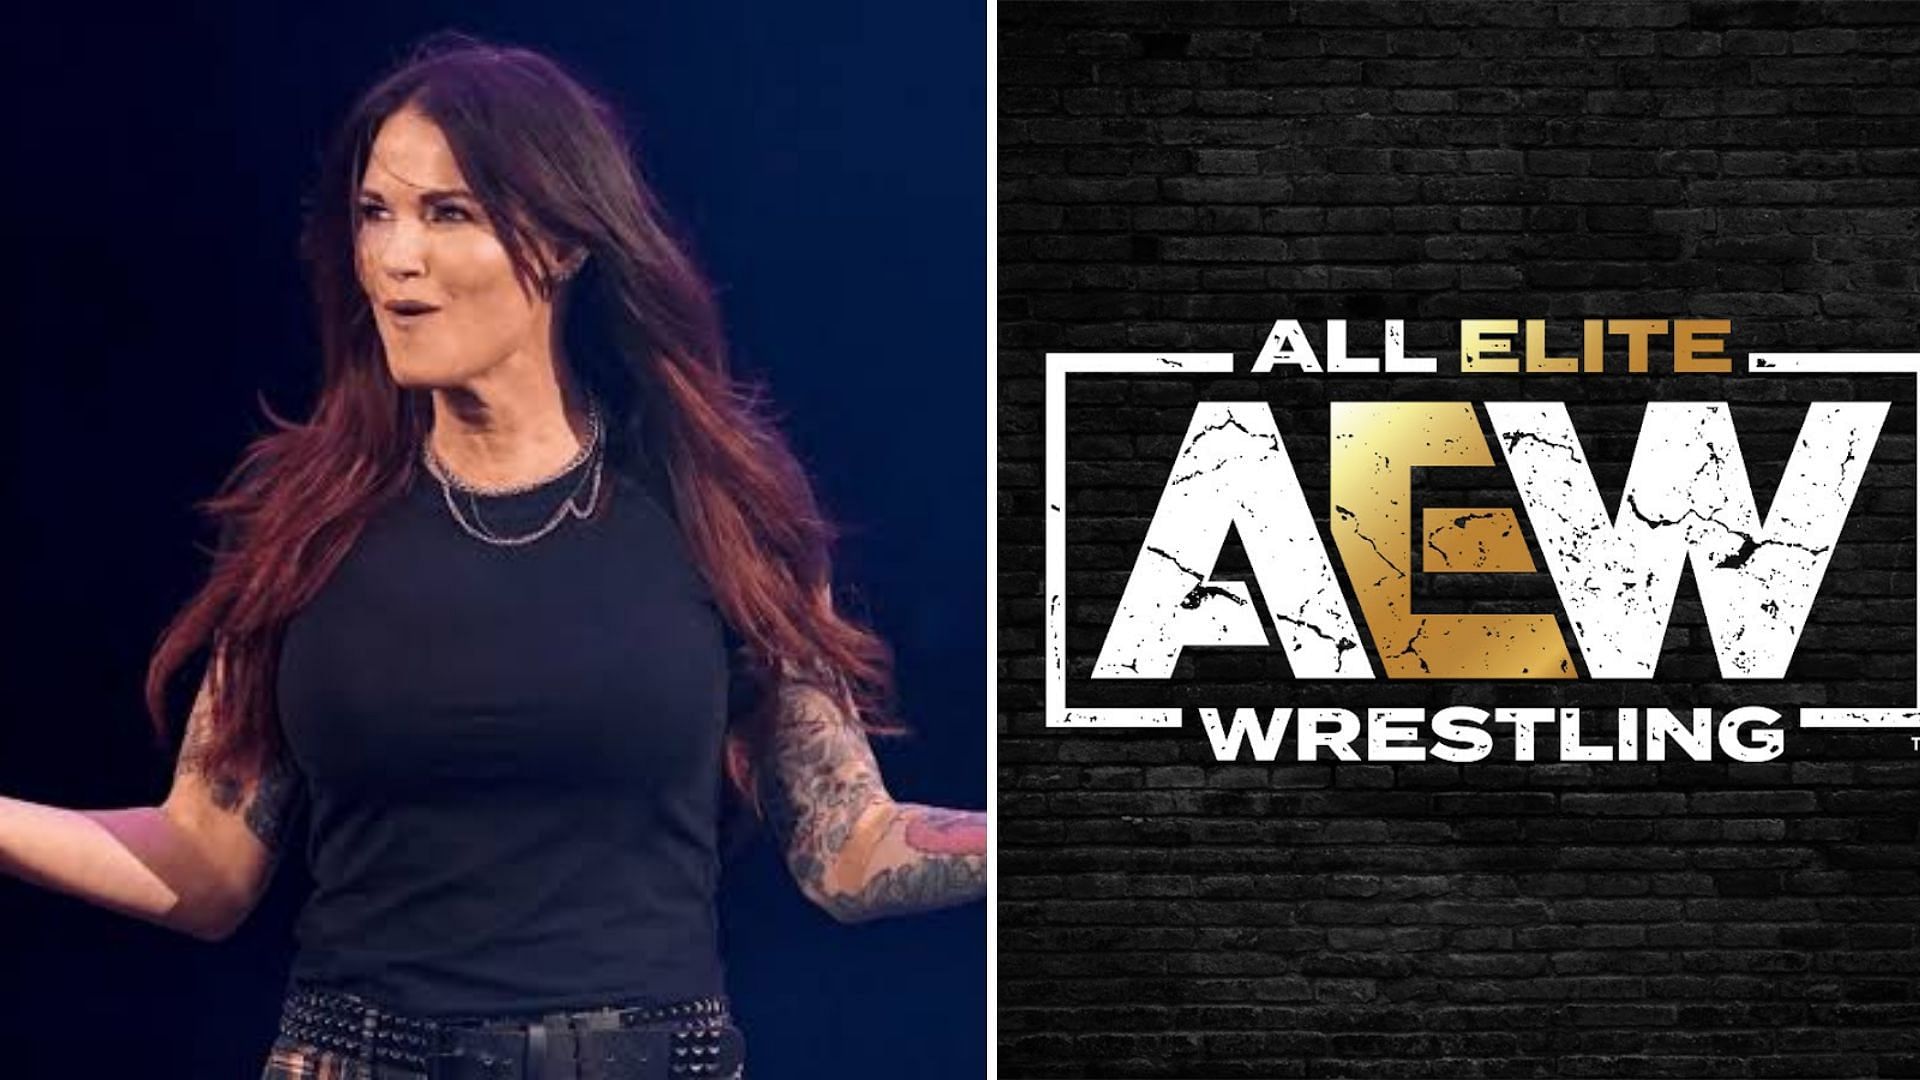 WWE Hall of Famer Lita could have been All Elite!